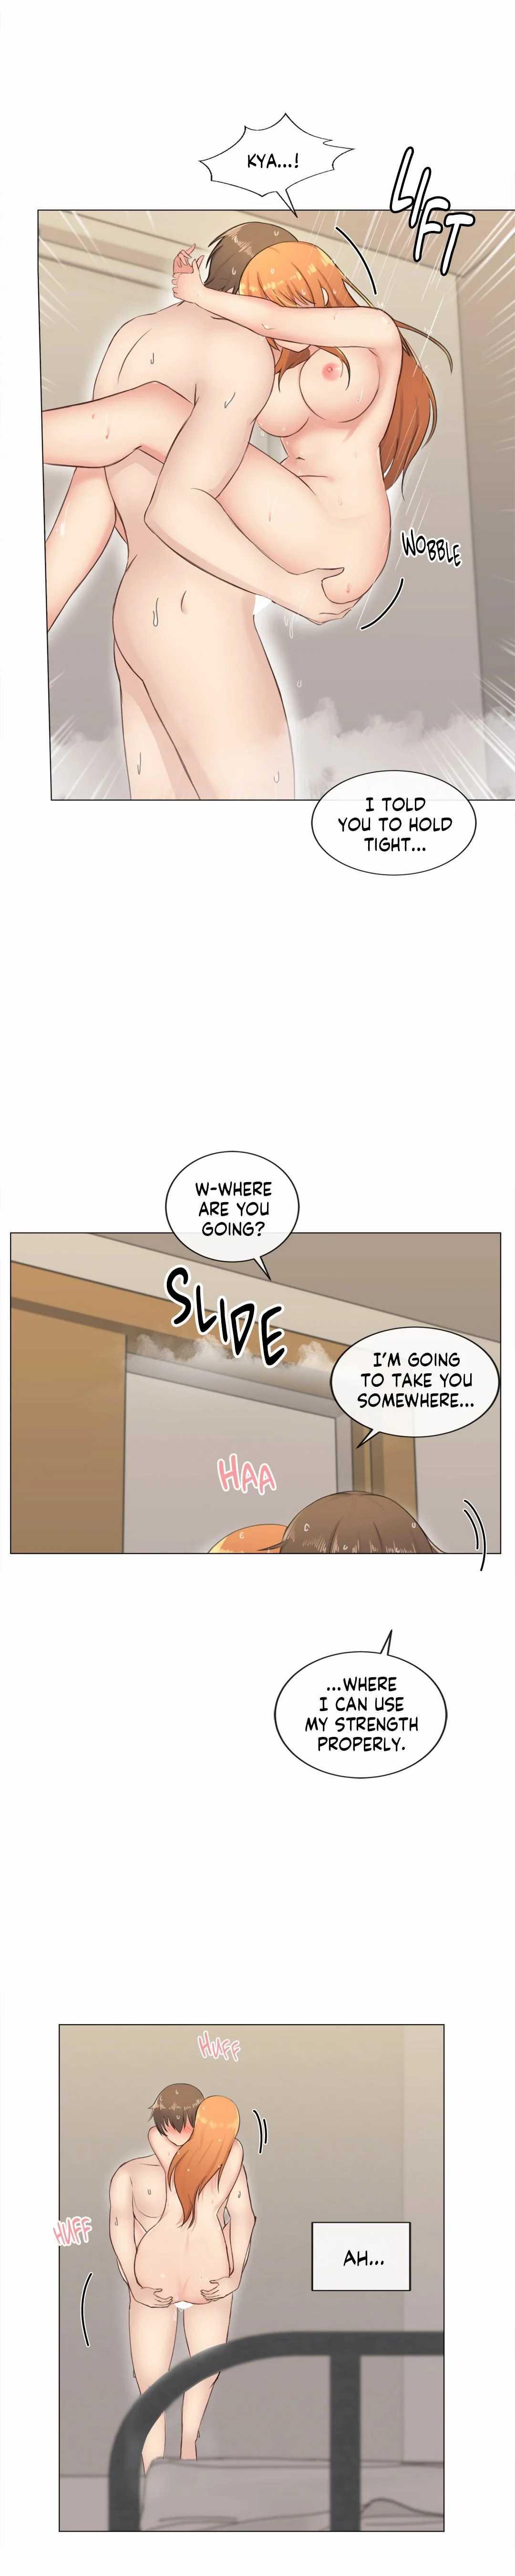 [Dumangoon, 130F] Sexcape Room: Pile Up Ch.9/9 [English] [Manhwa PDF] Completed 91